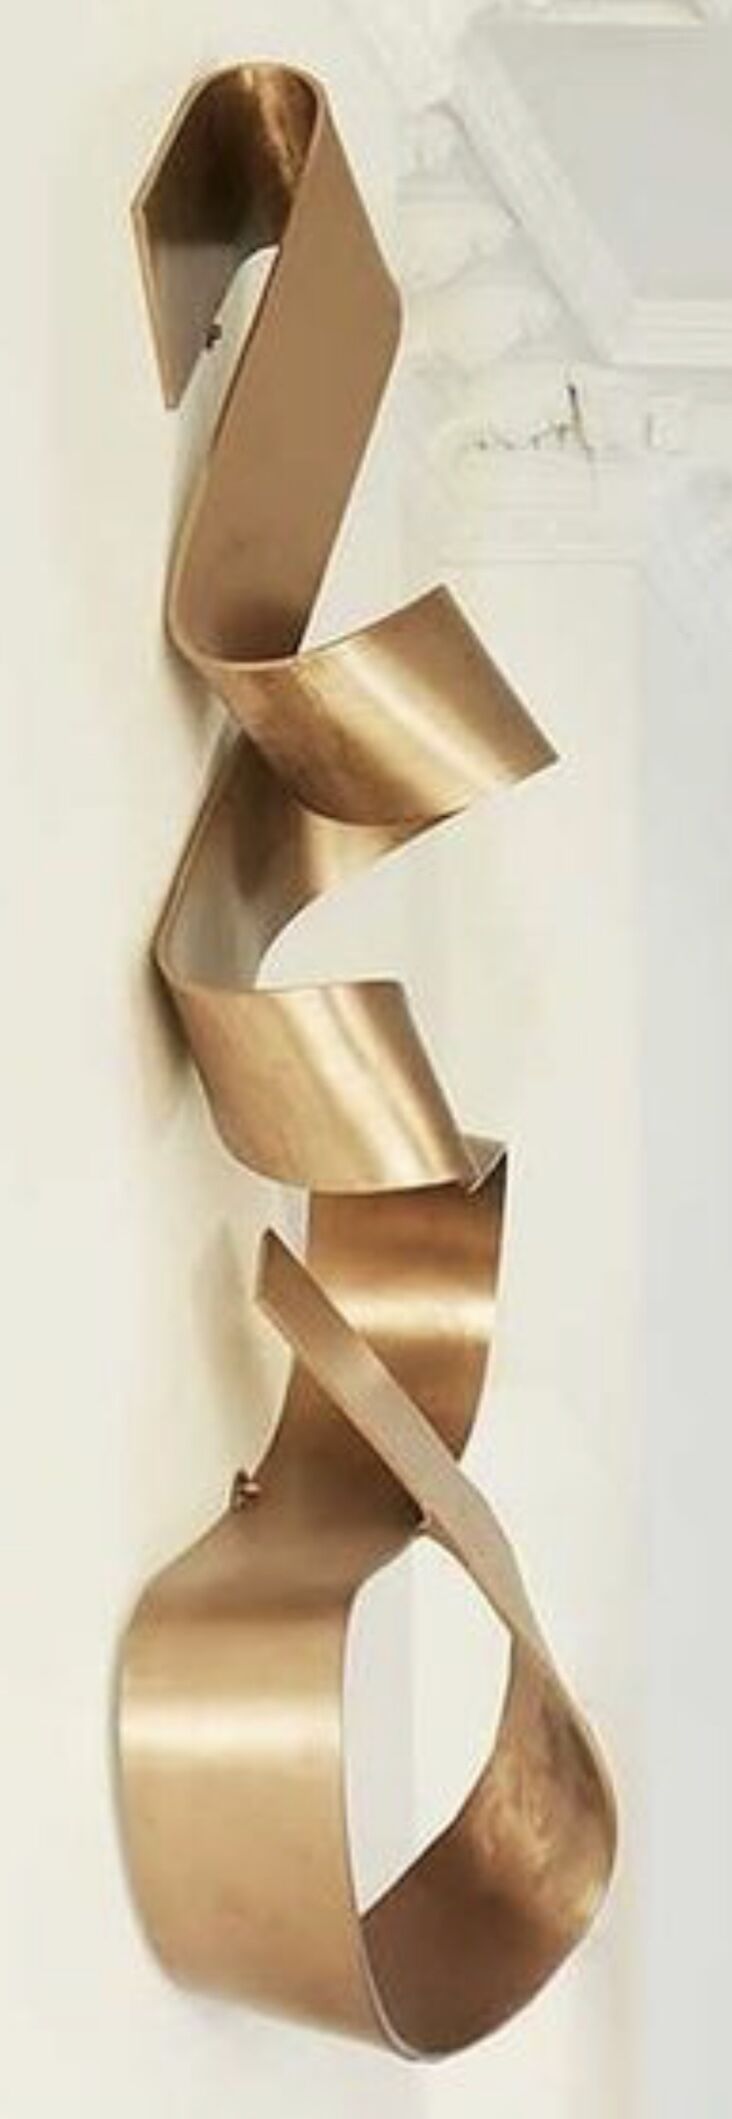 Copper line wall - a Sculpture & Installation by ENG LEYJA